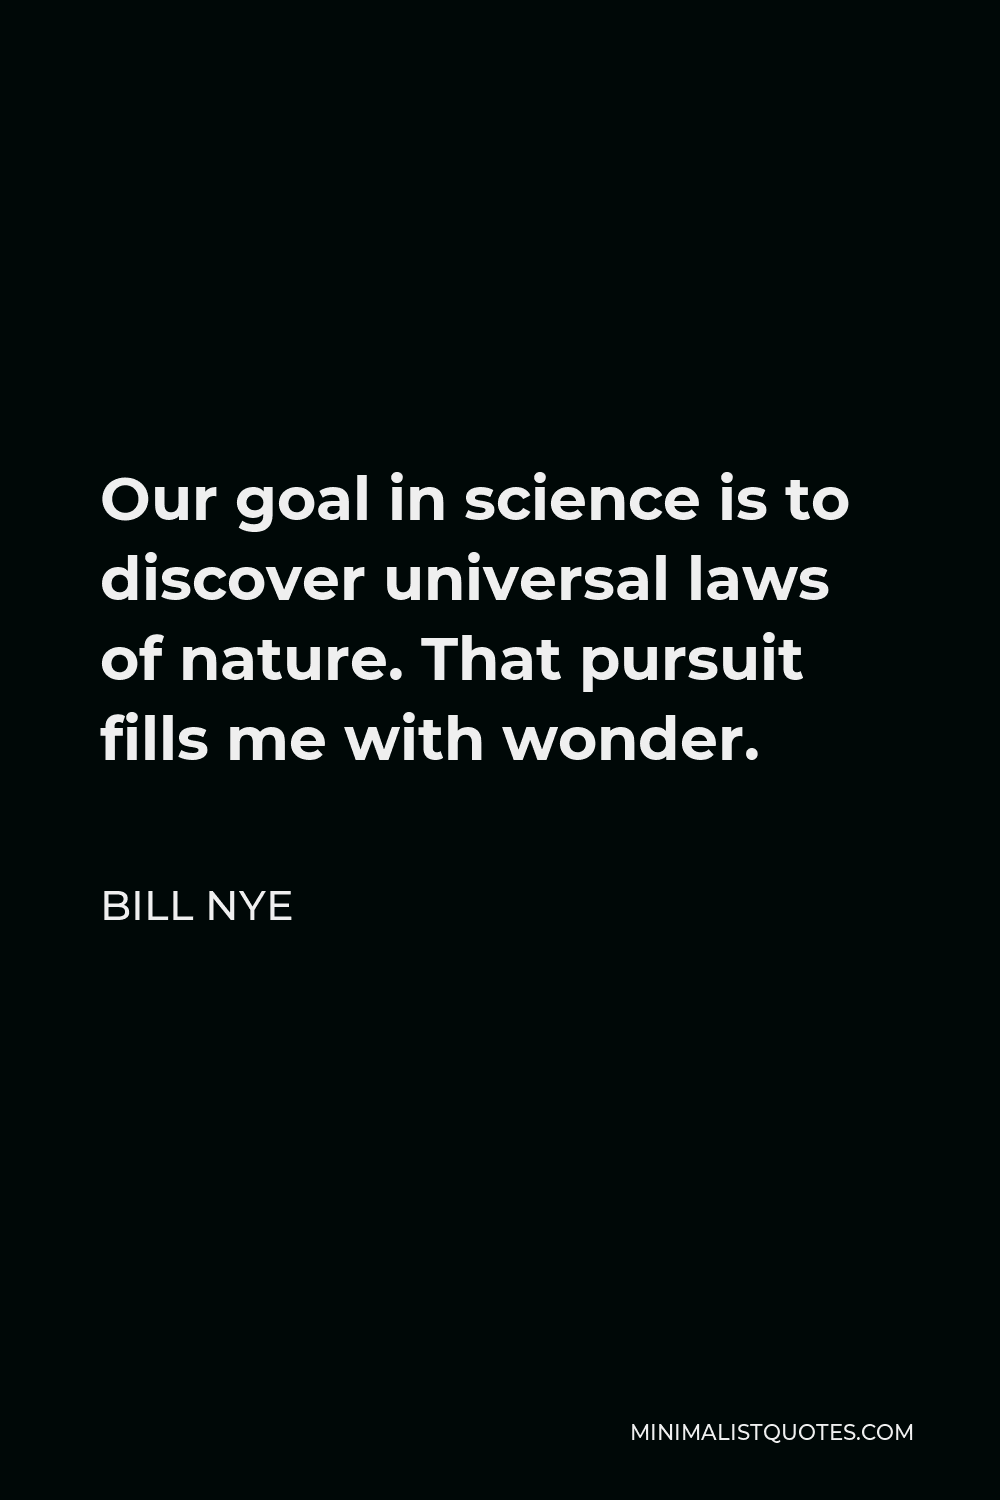 Bill Nye Quote - Our goal in science is to discover universal laws of nature. That pursuit fills me with wonder.